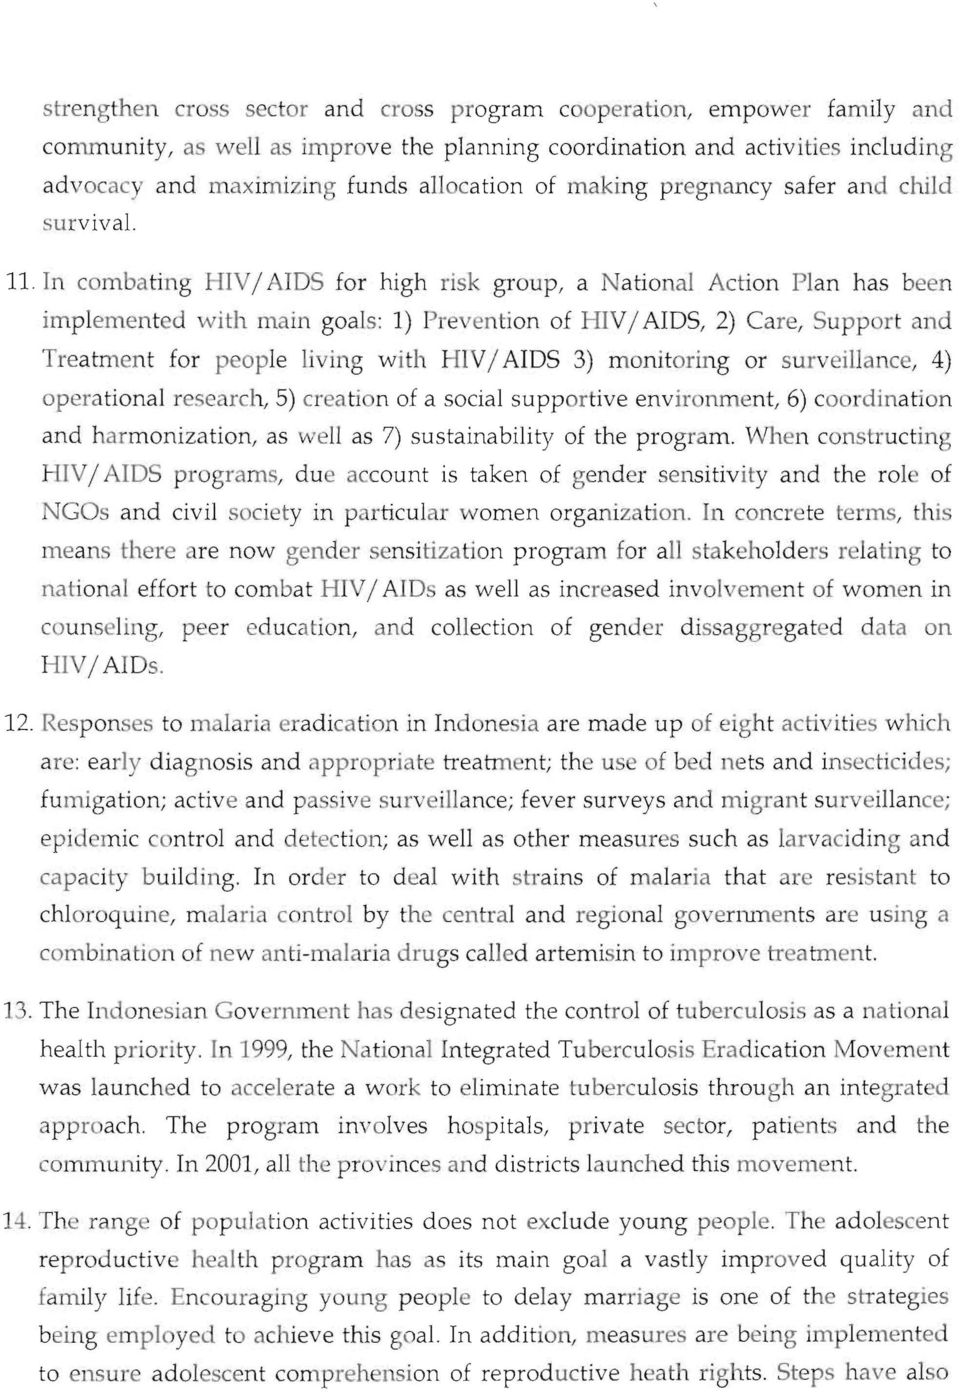 Tn combating HIV/ AIDS for high risk group, a National Action Plan has been implemented with main goals: 1) Pre ntion of illv/ AIDS, 2) Care, Supp rt and Treatment for people living with HIV/ AIDS 3)